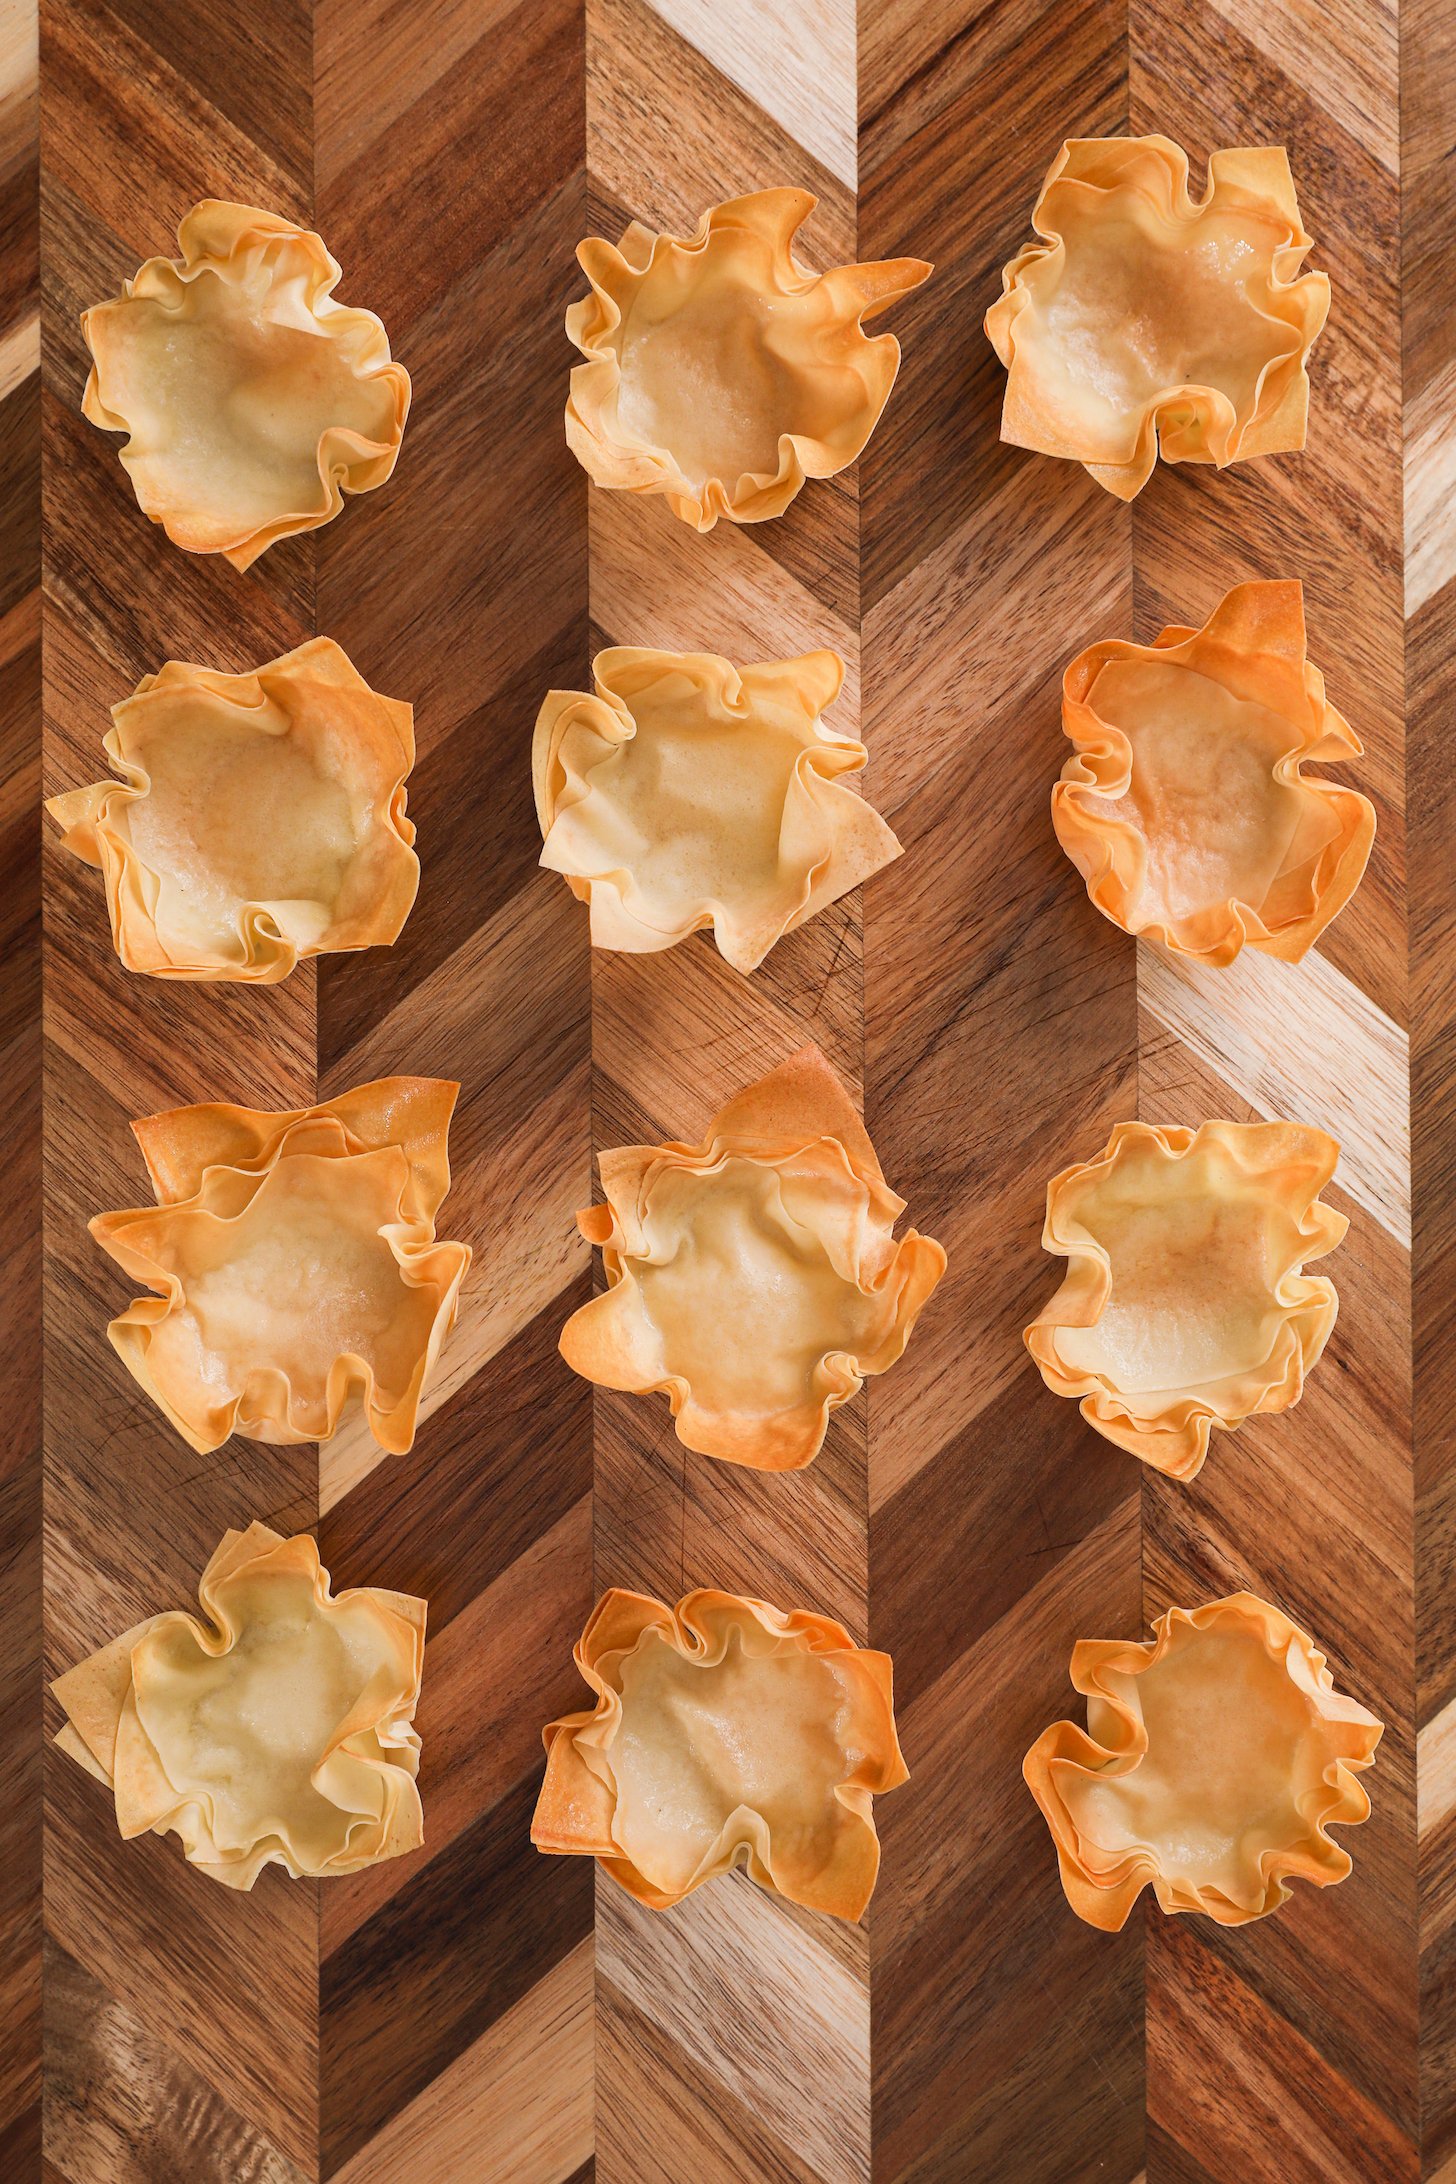 12 baked pastry shells shaped like a flower on a wooden tray.